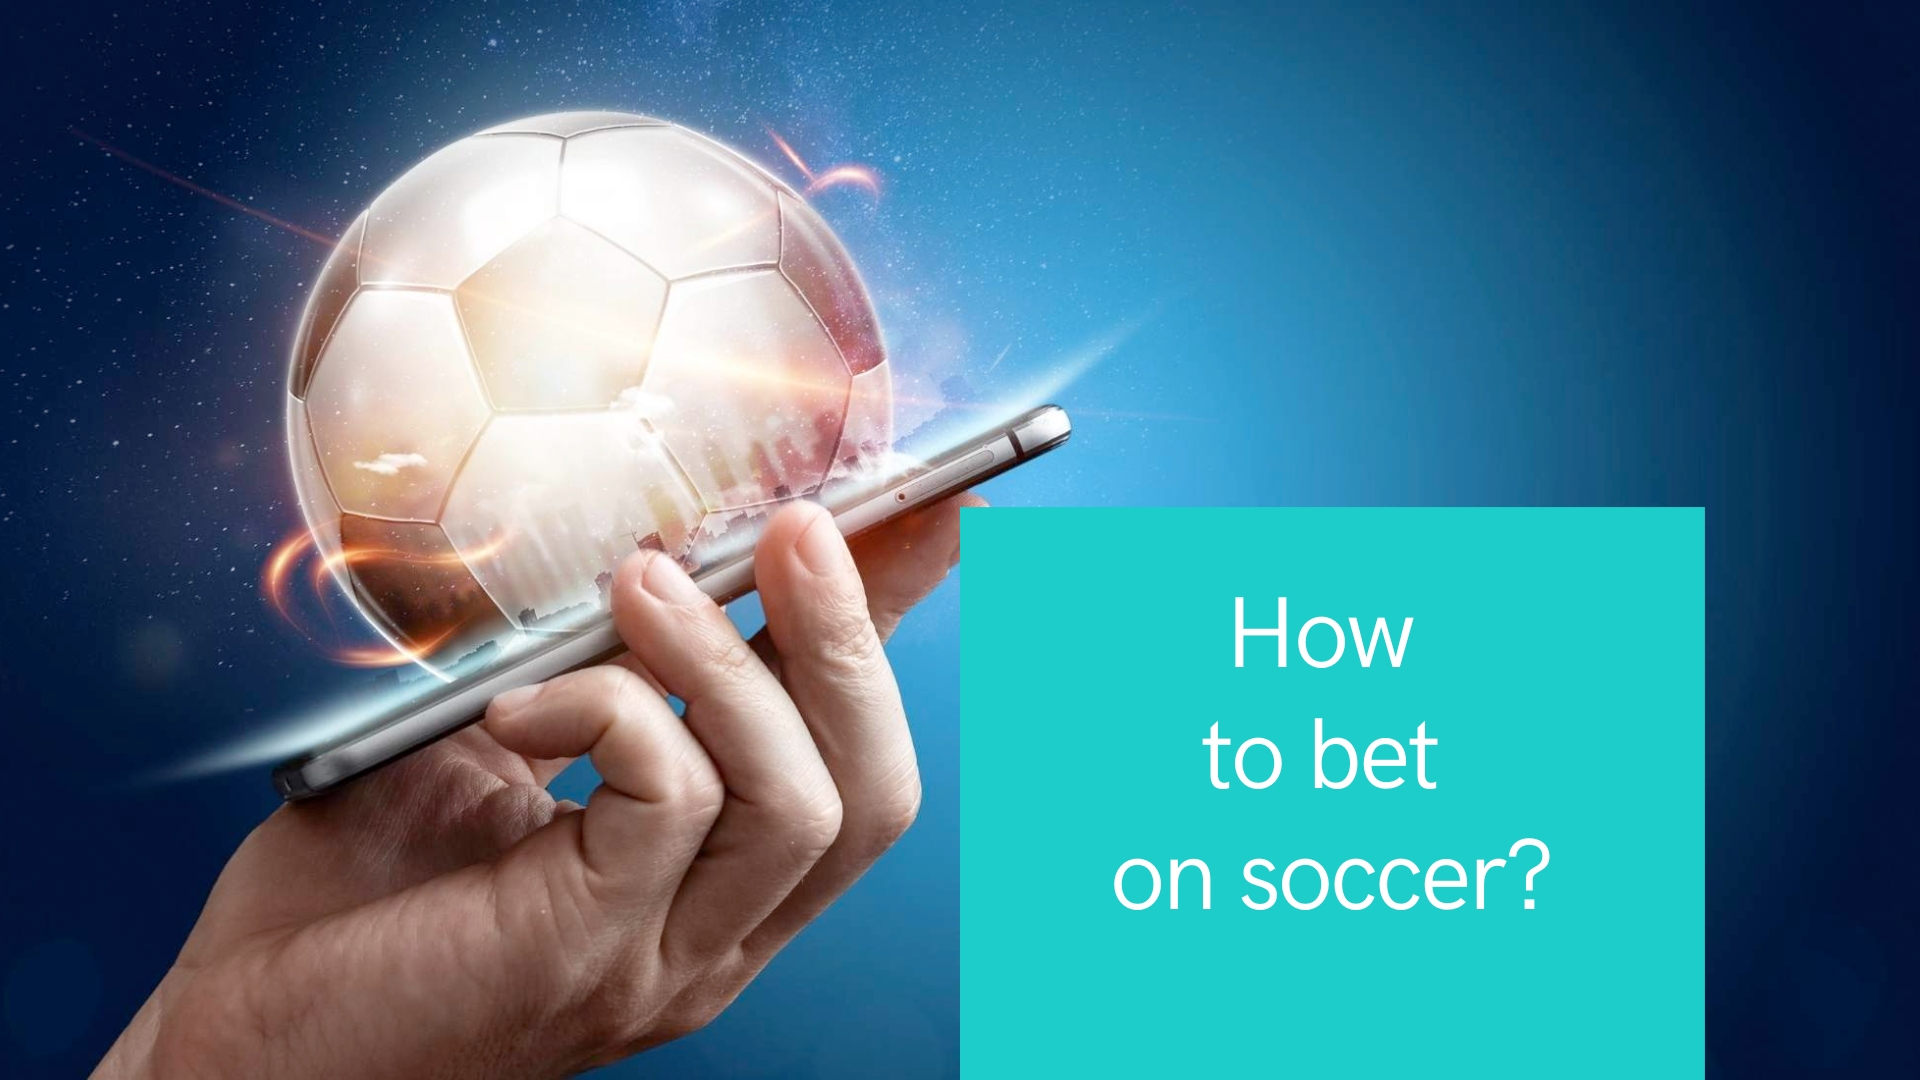 How to bet on soccer?